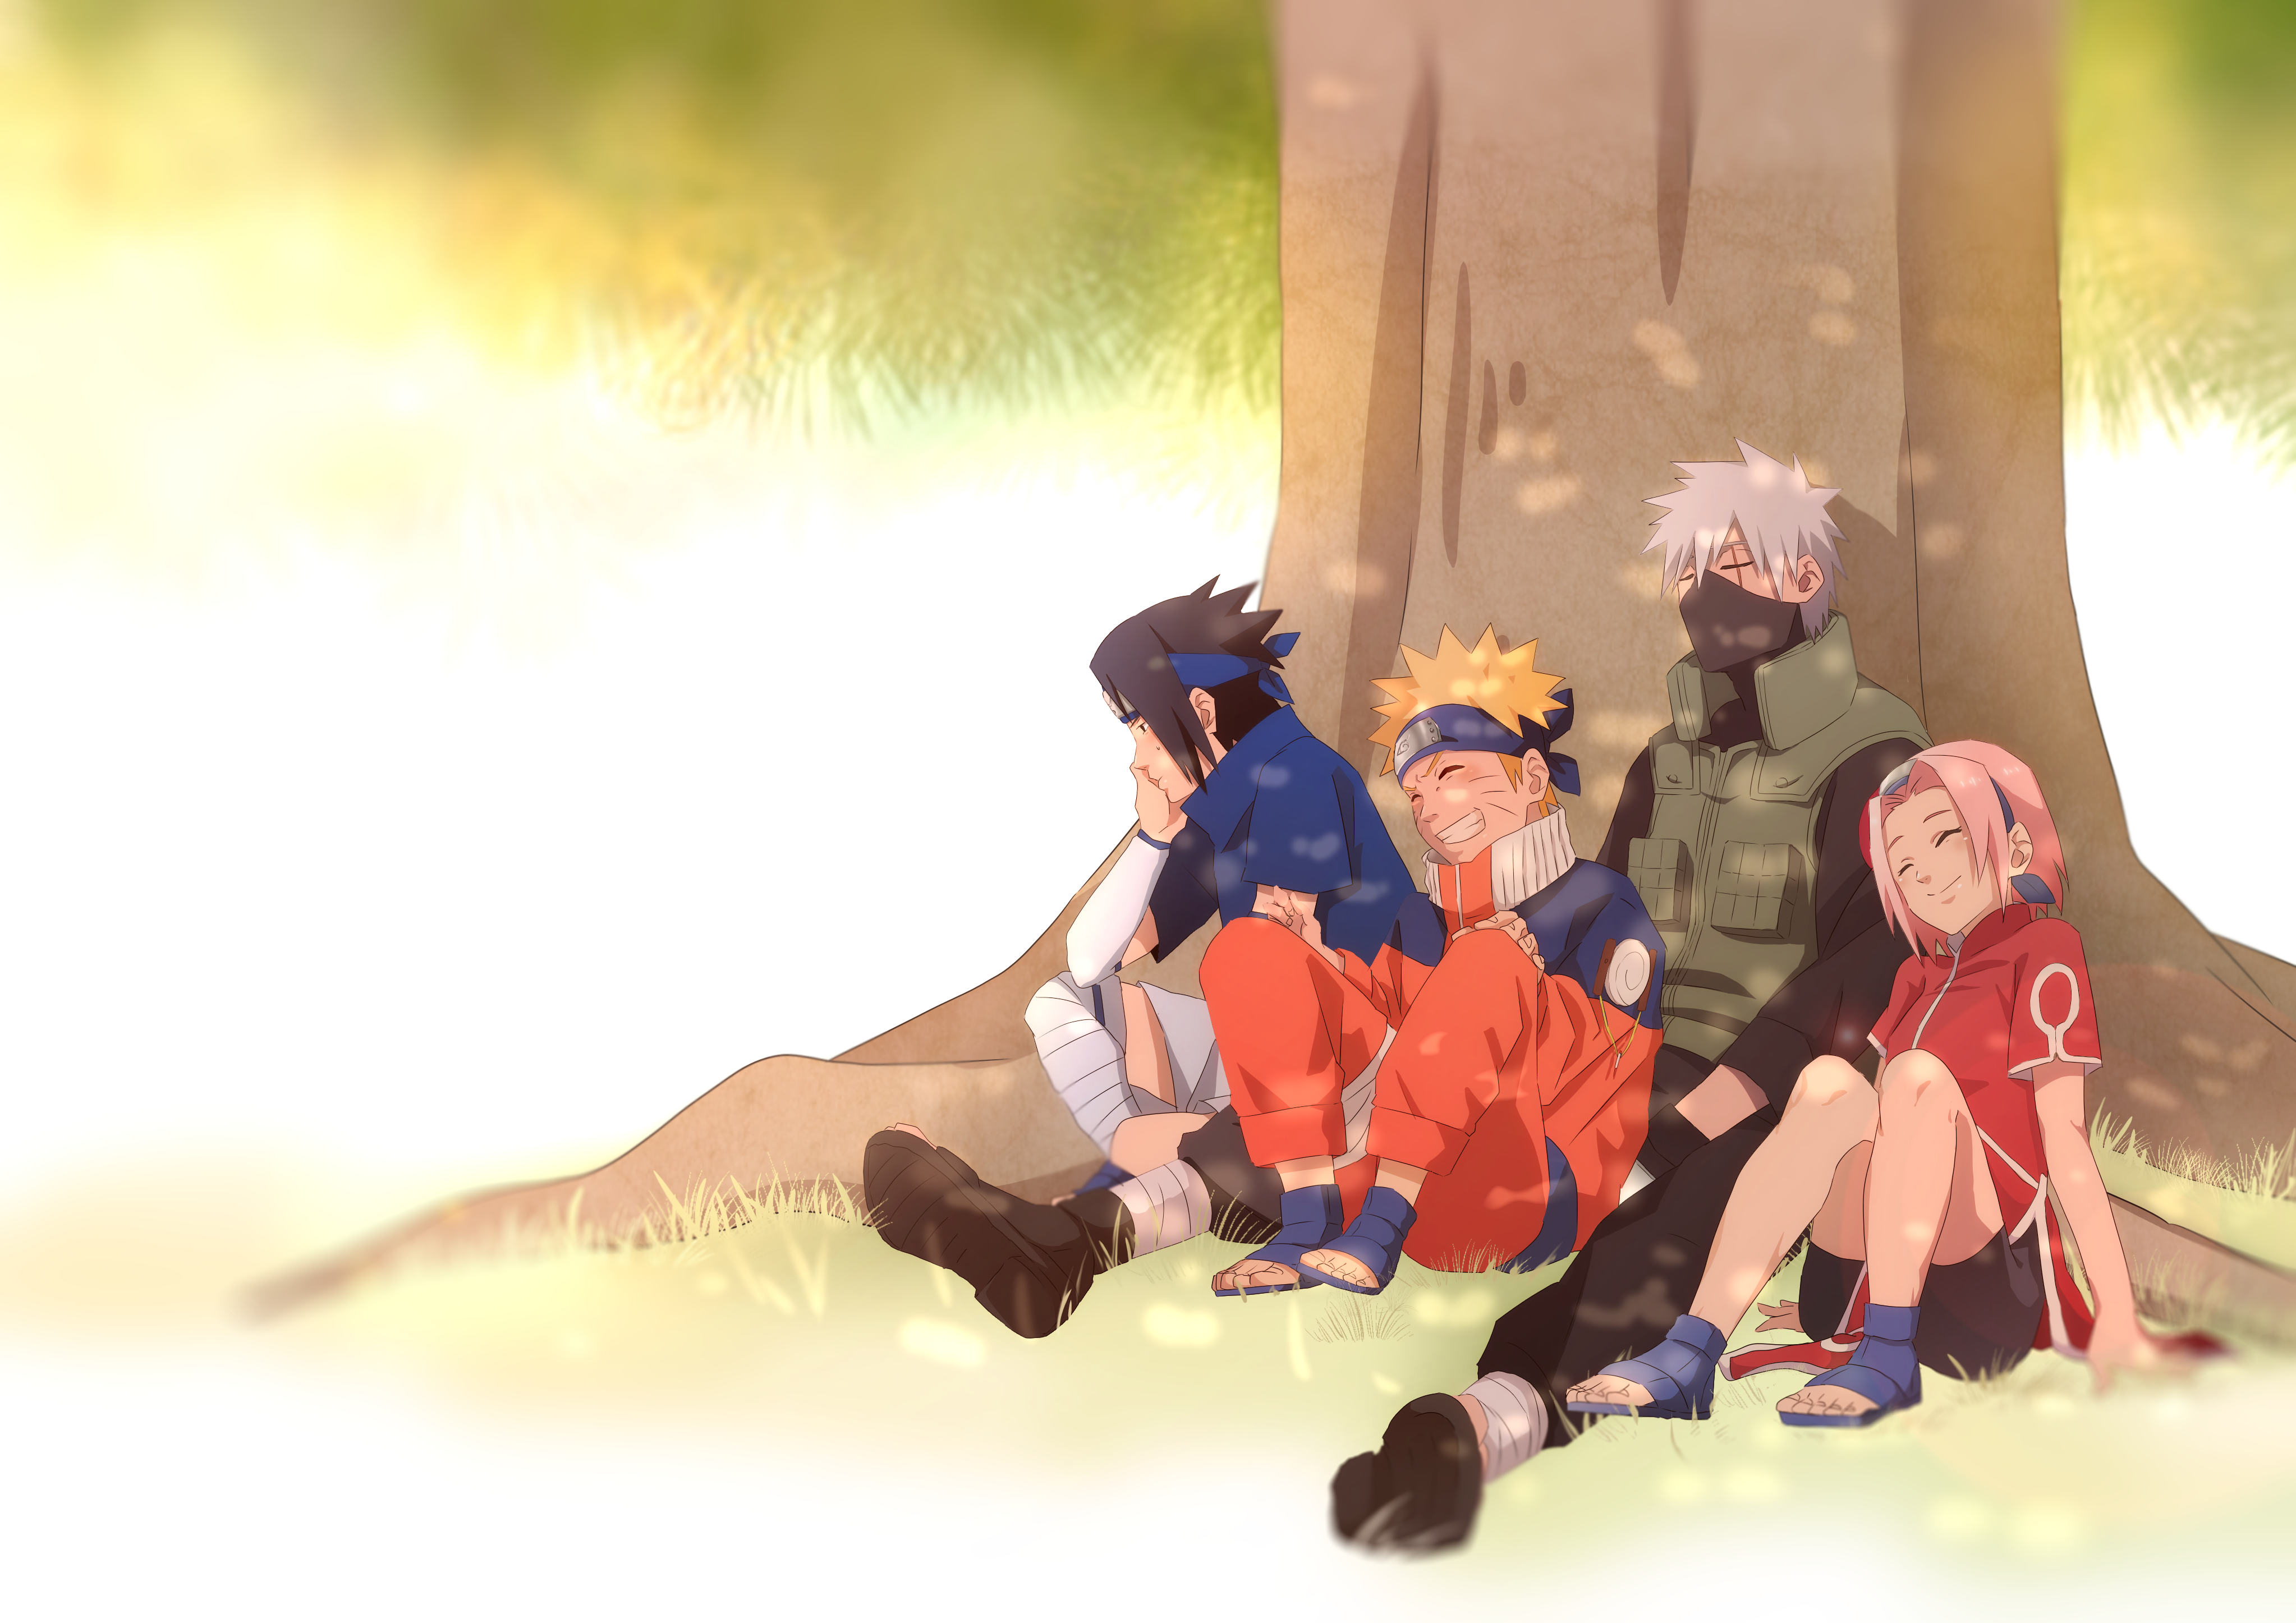 Anime Naruto 4k Ultra HD Wallpaper by 一 咲. Please Login To Rate This! 